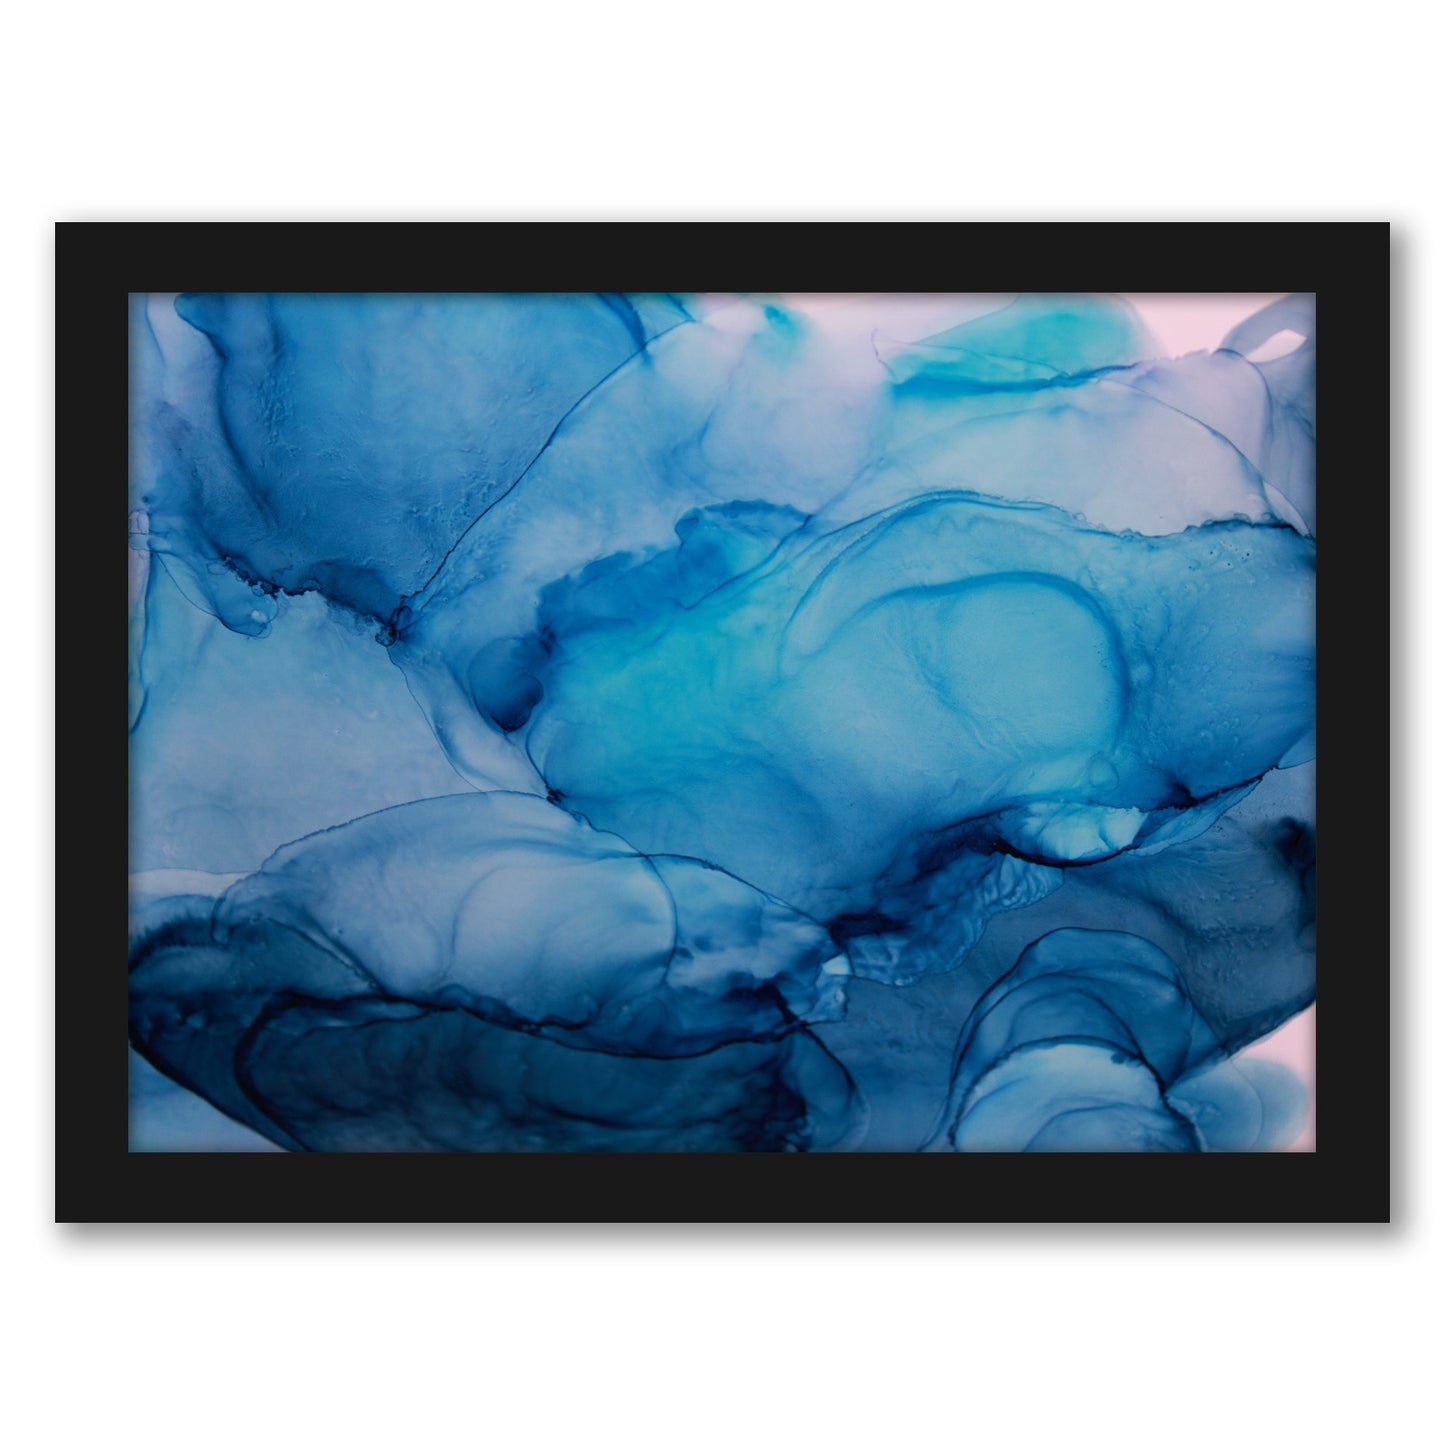 In Too Deep by Emma Thomas - Framed Print